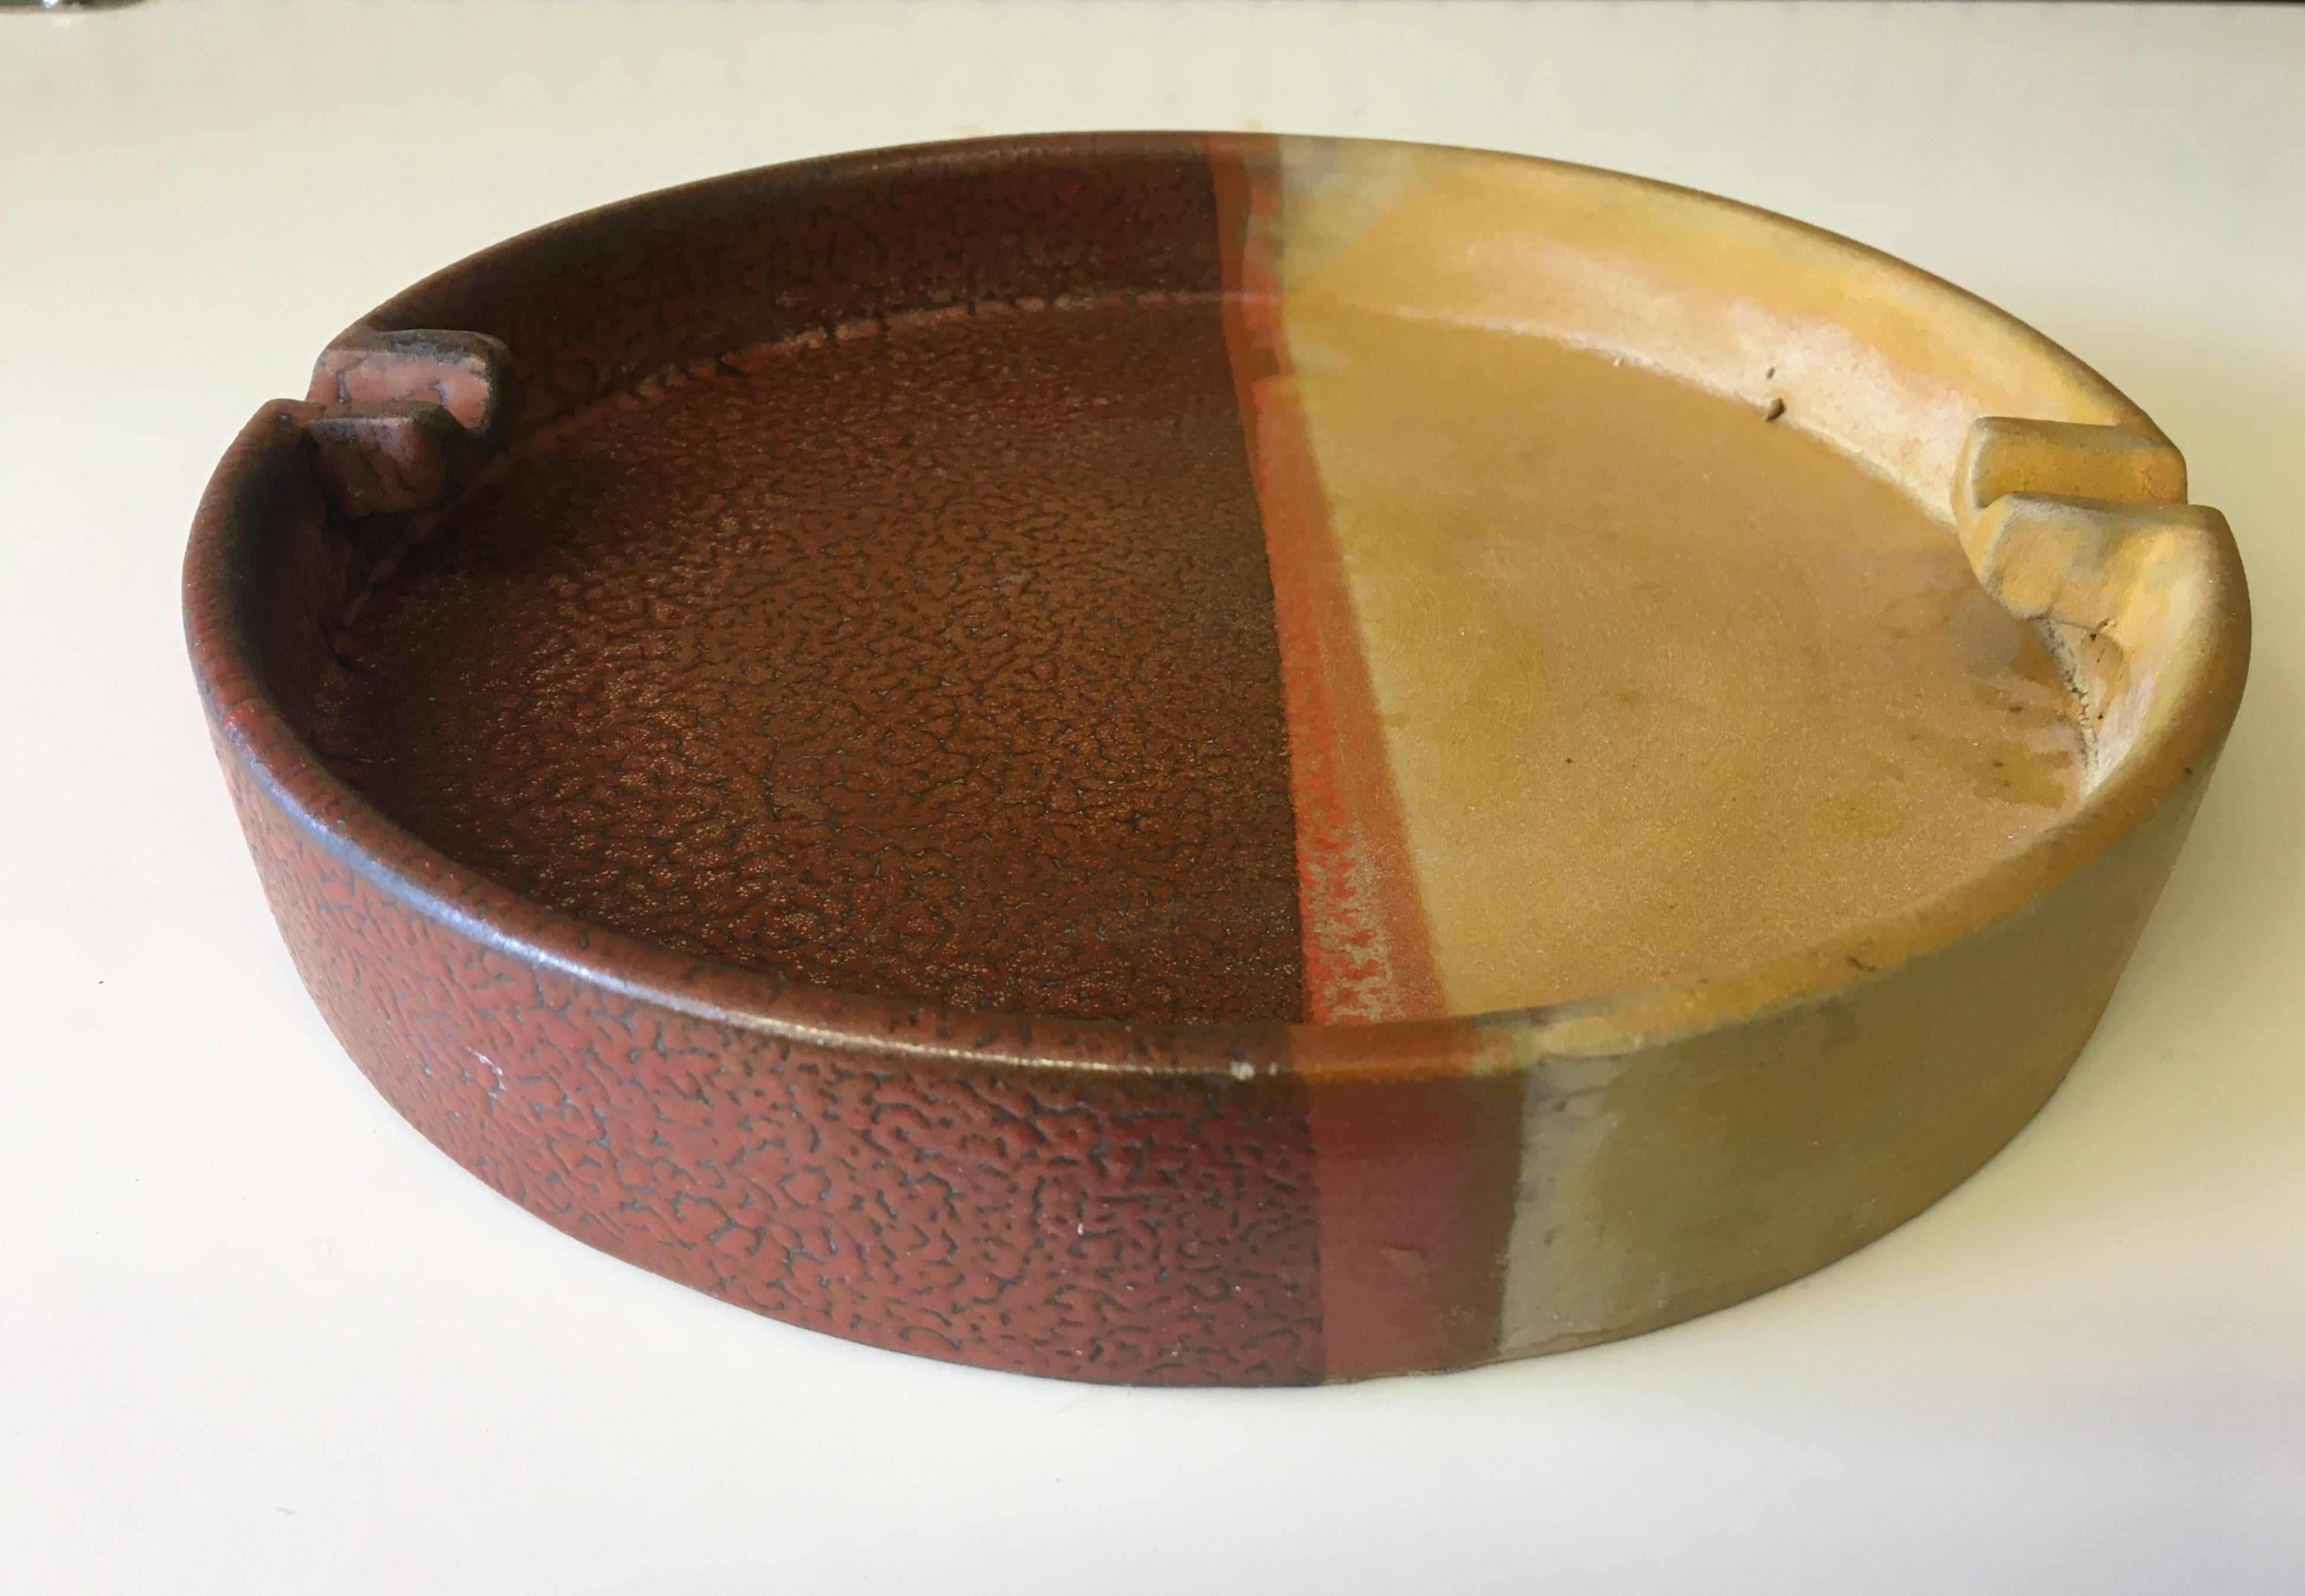 Beautiful orange, brown and mustard combination colors and glaze on this unique large ashtray. Made in Italy, circa 1950s by Bitossi for Raymor Imports.